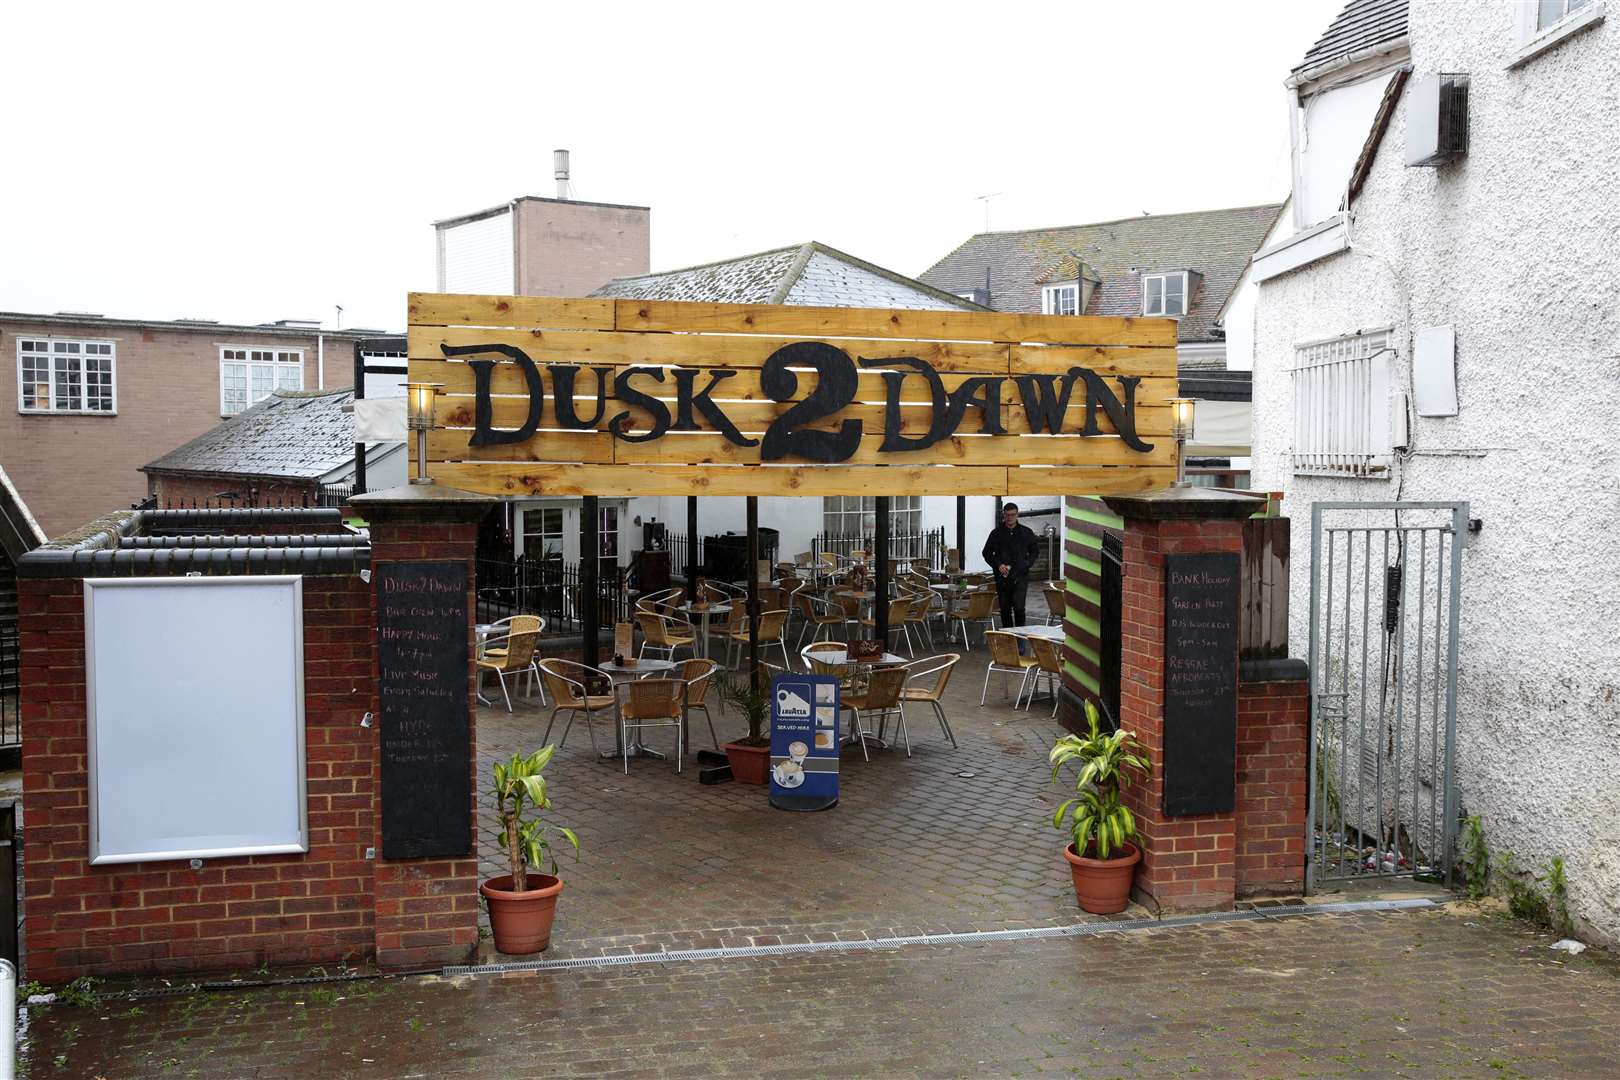 Mr Thwaites was attacked in Dusk 2 Dawn, in King Street, Maidstone in 2015, Picture: Martin Apps